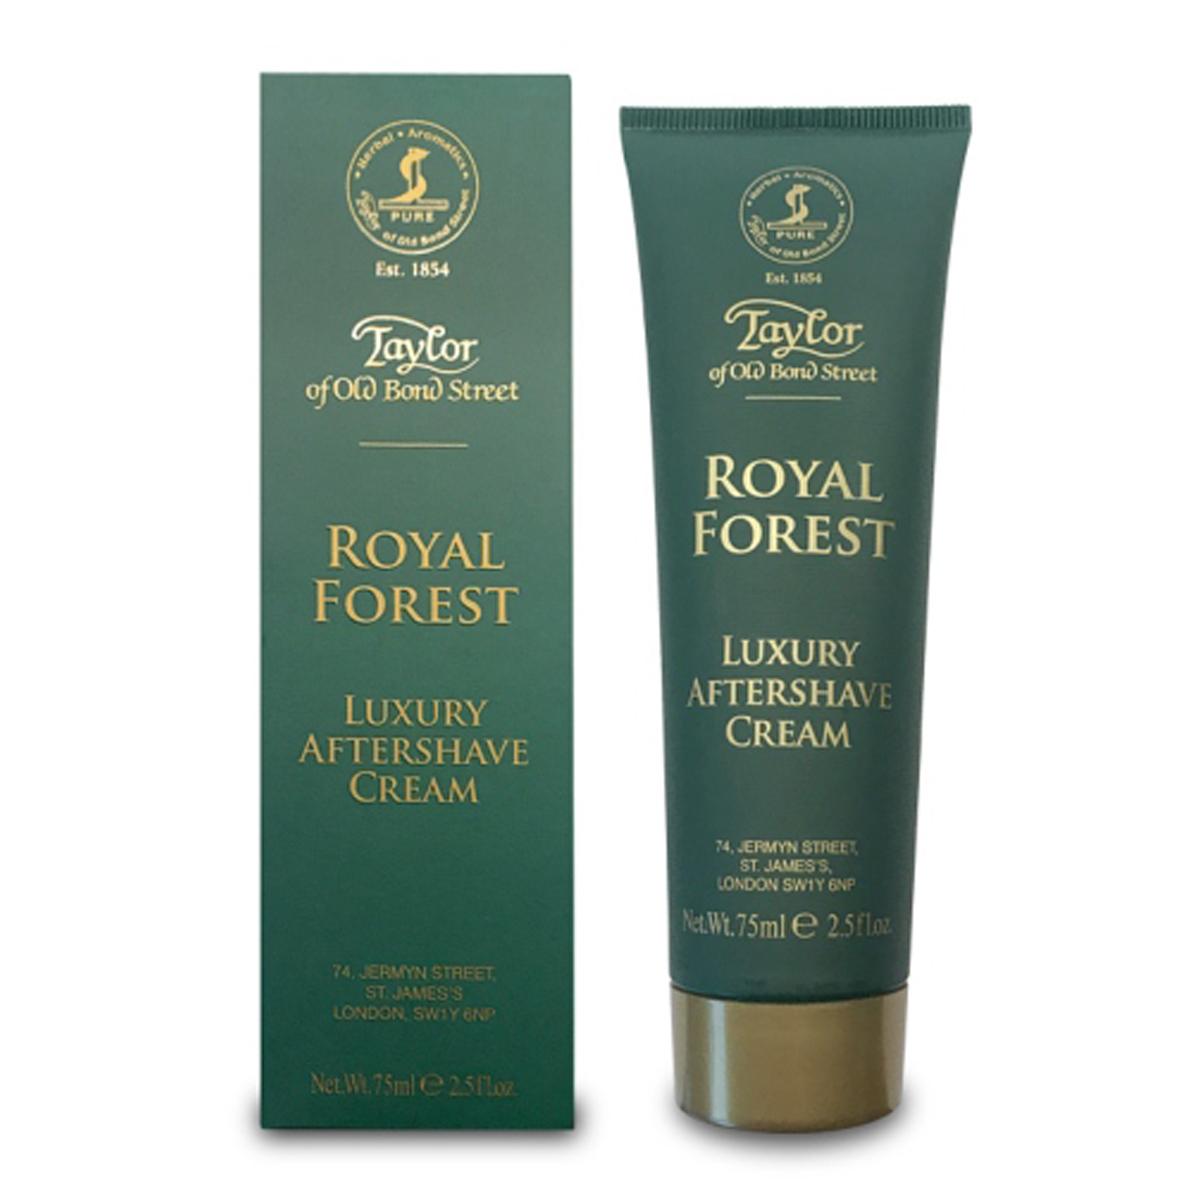 Primary image of Aftershave Crm- Royal Forest